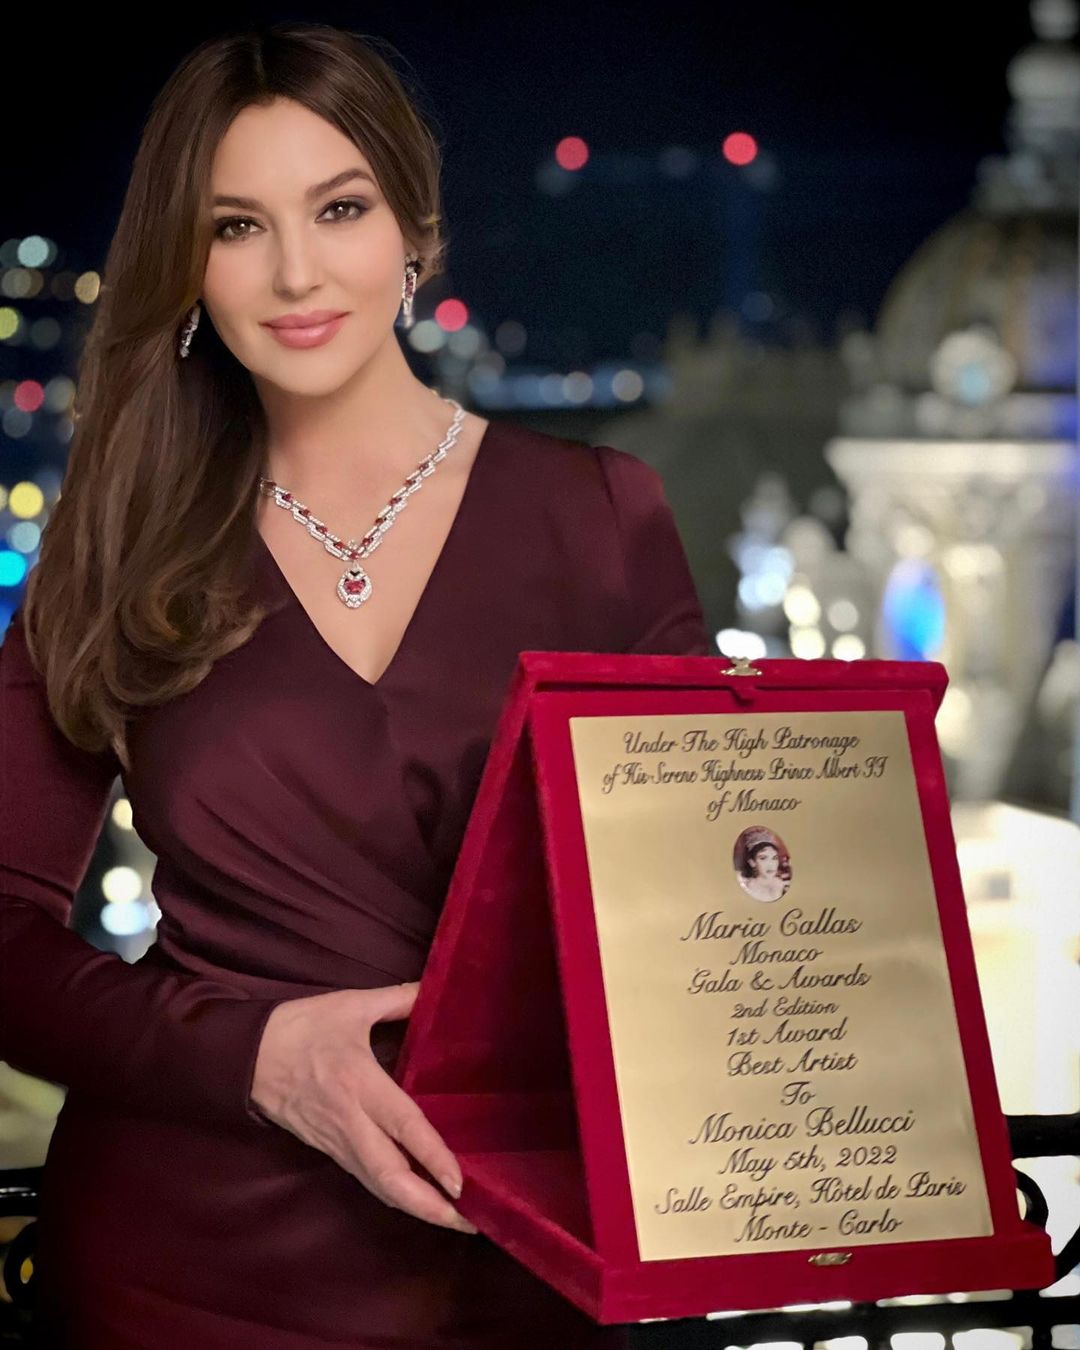 ❤️Thank you for the Award at “Maria Callas Monaco Gala” last night, it really moves me deeply, for “Maria Callas Letters and Memoirs” Director and photo @tomvolf 
Dressed @dolcegabbana 
Jewelry @cartier 
Hair @cedrickerguillec 
Mua @letiziacarnevale 

#monicabellucci#mariacallasgala#award#lettersandmemoirs#director#tomvolf#montecarlo#monaco#dress#dolcegabbana#jewelry#cartier#cartierdiamonds